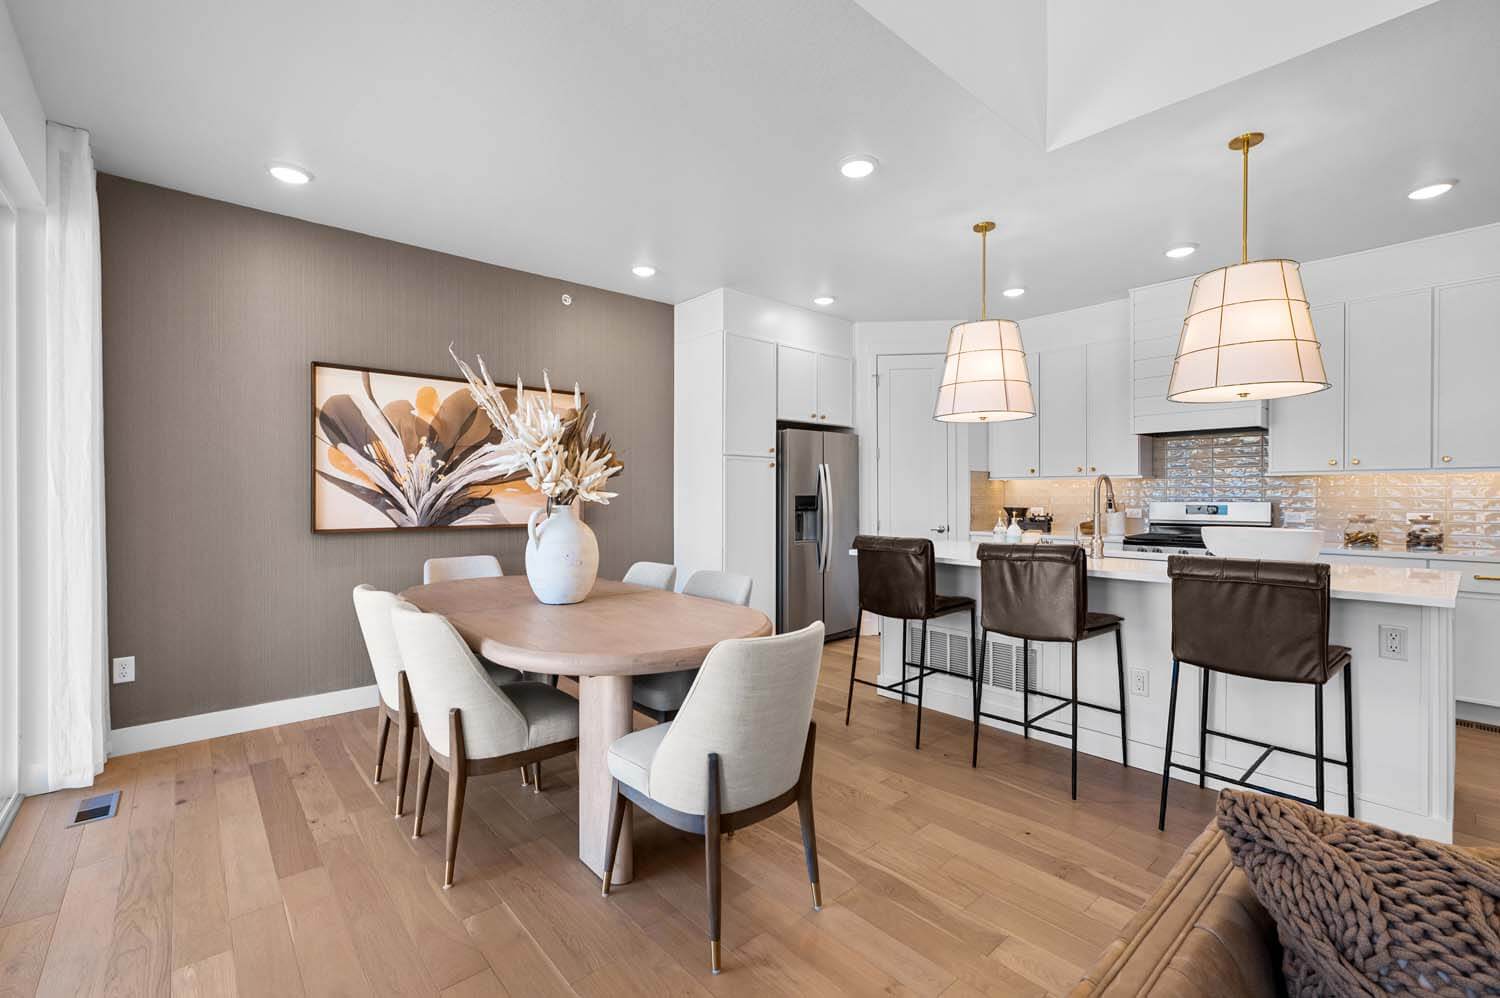 The open design of the main floor has the dining area, with its tan wallpapered accent wall, next to the kitchen featuring white cabinets, quartz counters and stainless steel appliances.